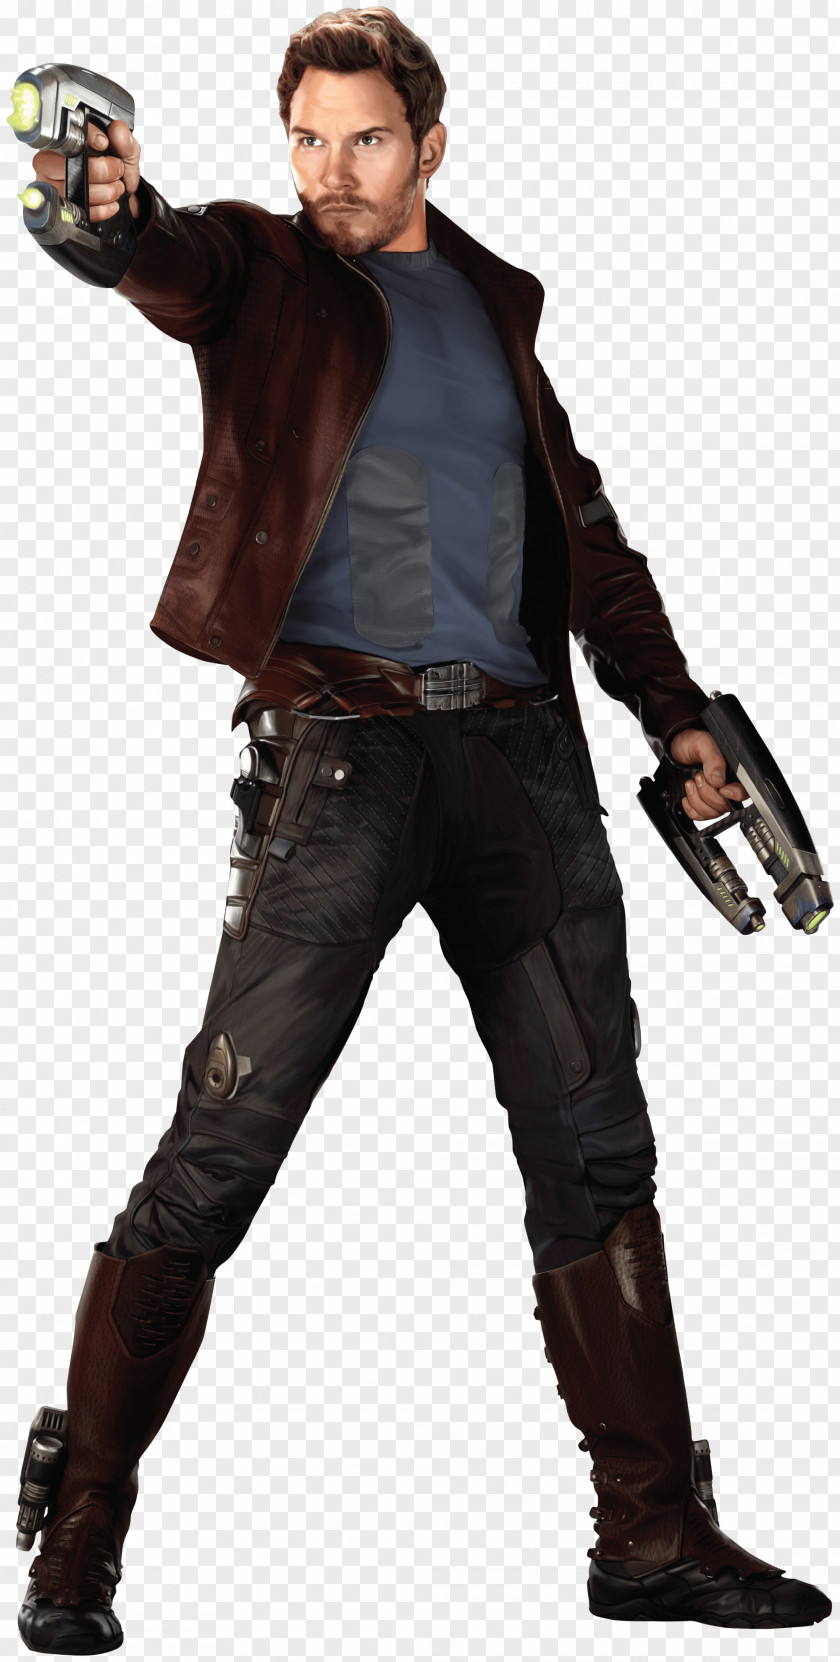 Chris Pine Clipart Pratt Marvel: Avengers Alliance Star-Lord Guardians Of The Galaxy Black Panther PNG